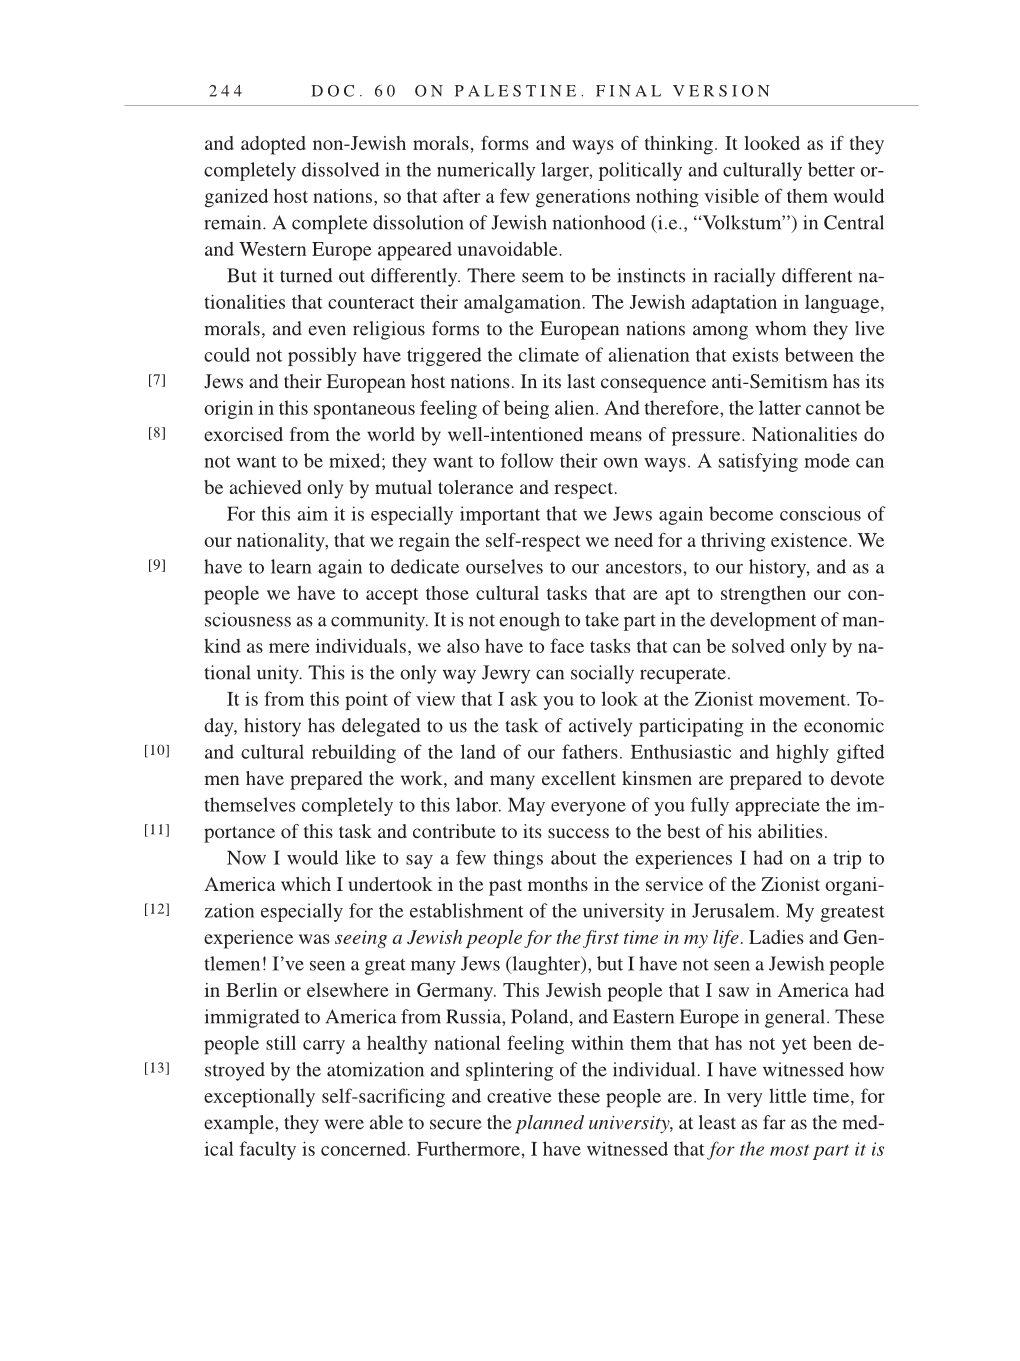 Volume 7: The Berlin Years: Writings, 1918-1921 (English translation supplement) page 244